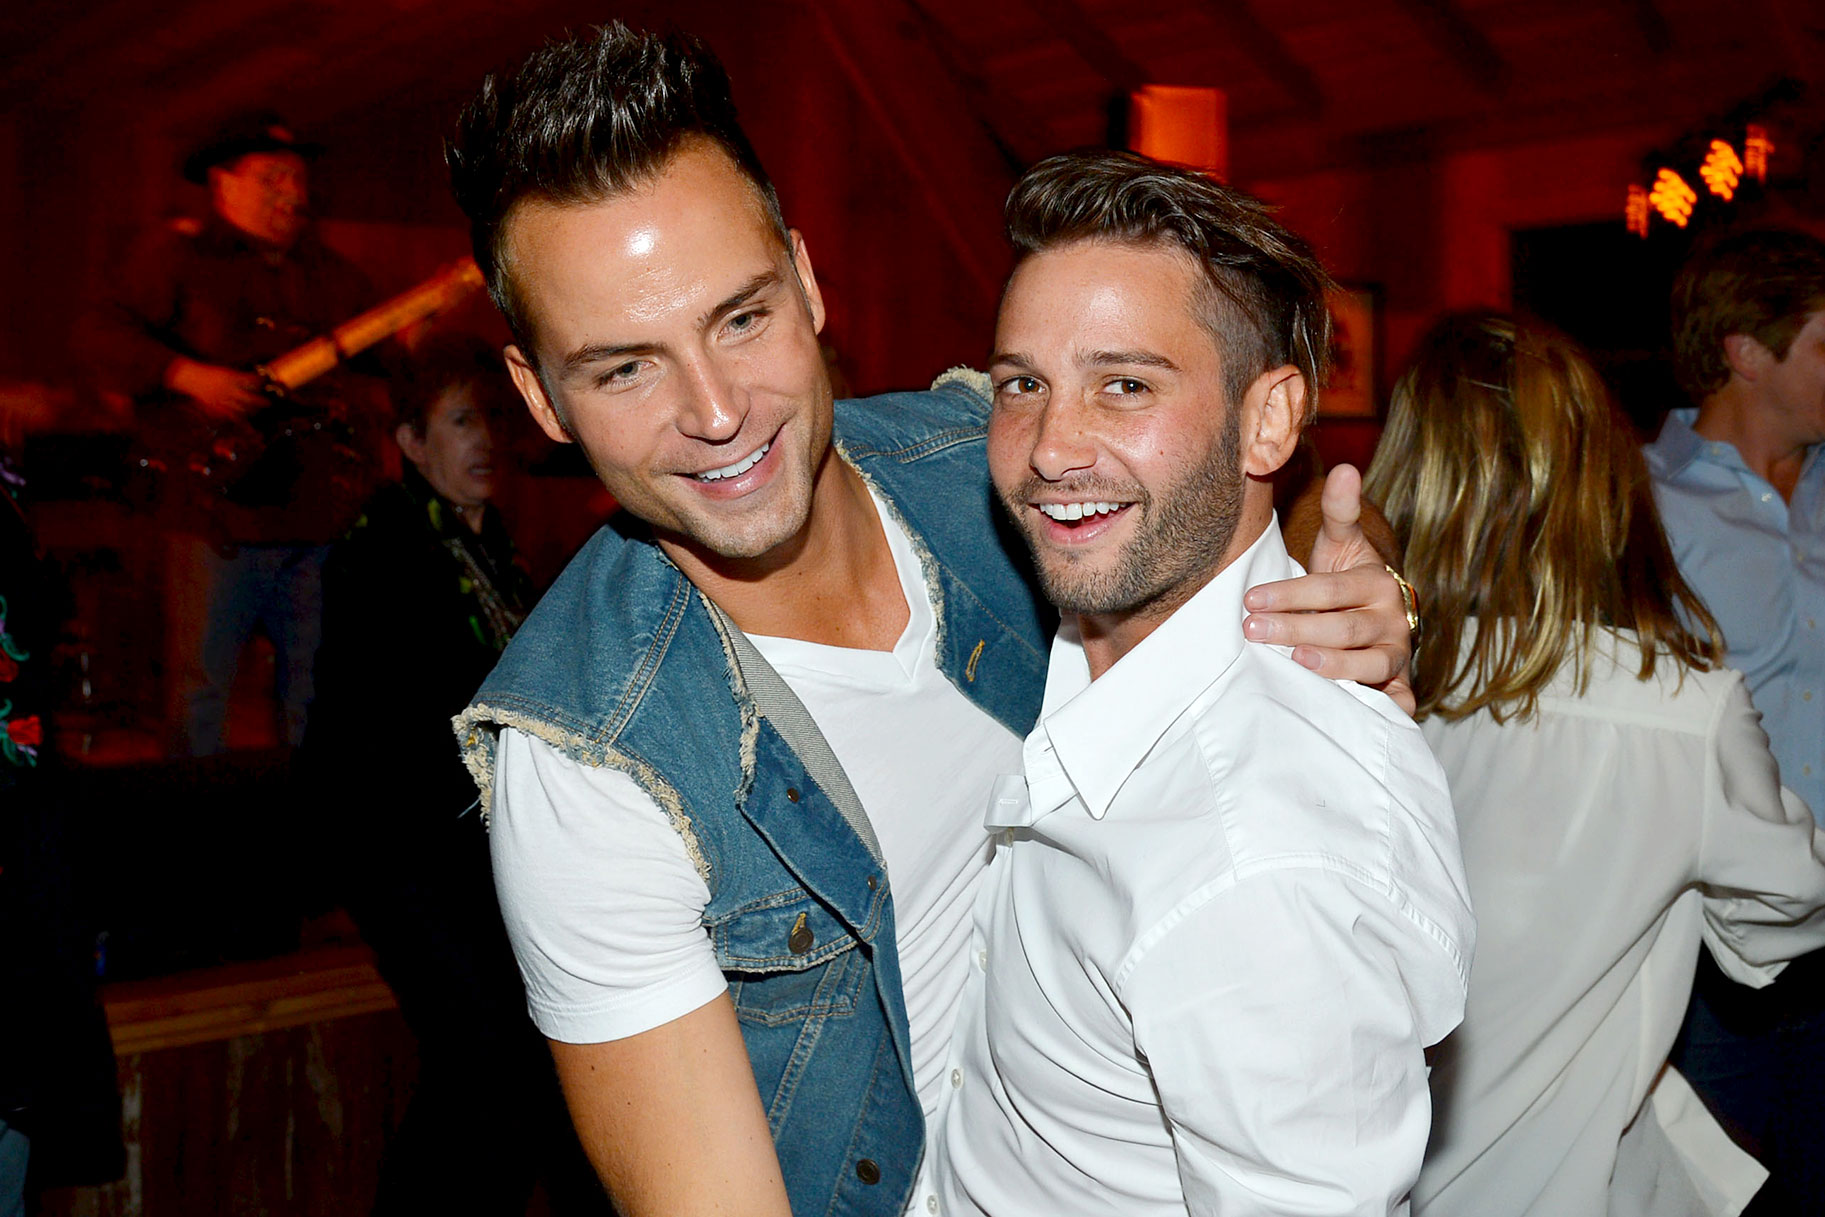 Josh Flagg's Wedding Plans Might Include This Destination | The Daily Dish